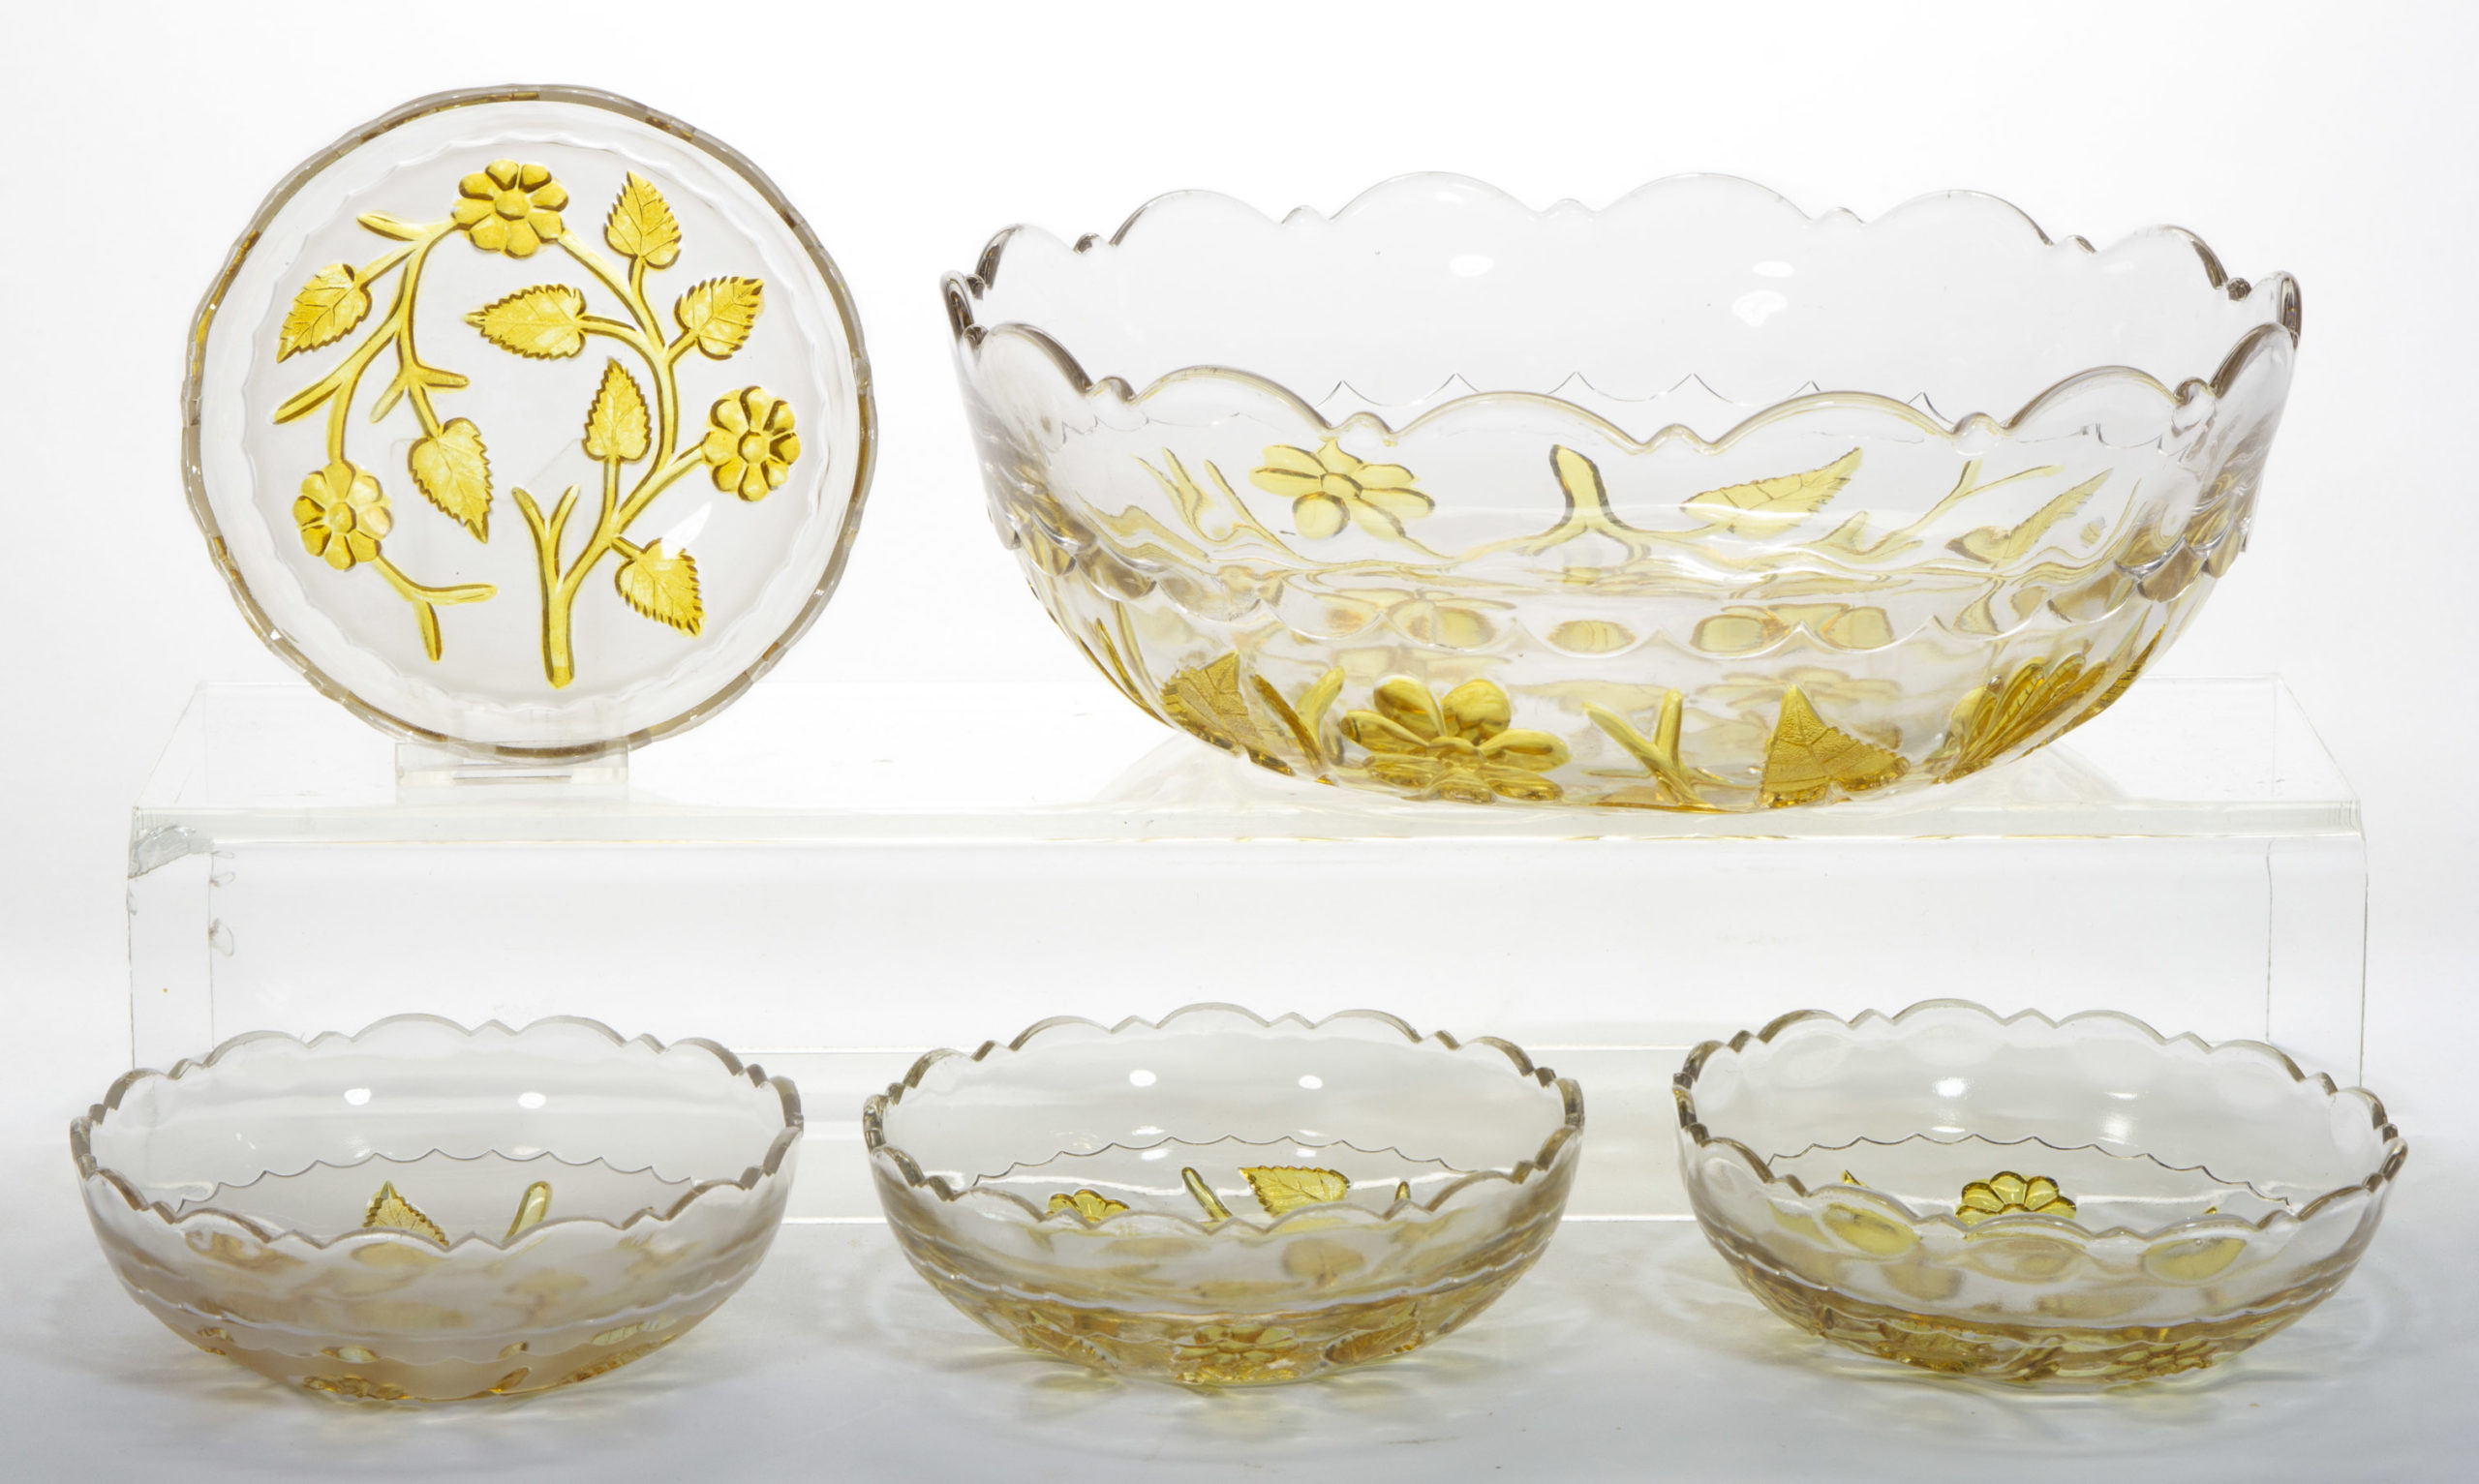 HOBBS NO. 339 / LEAF AND FLOWER – AMBER-STAINED FIVE-PIECE BERRY SET,